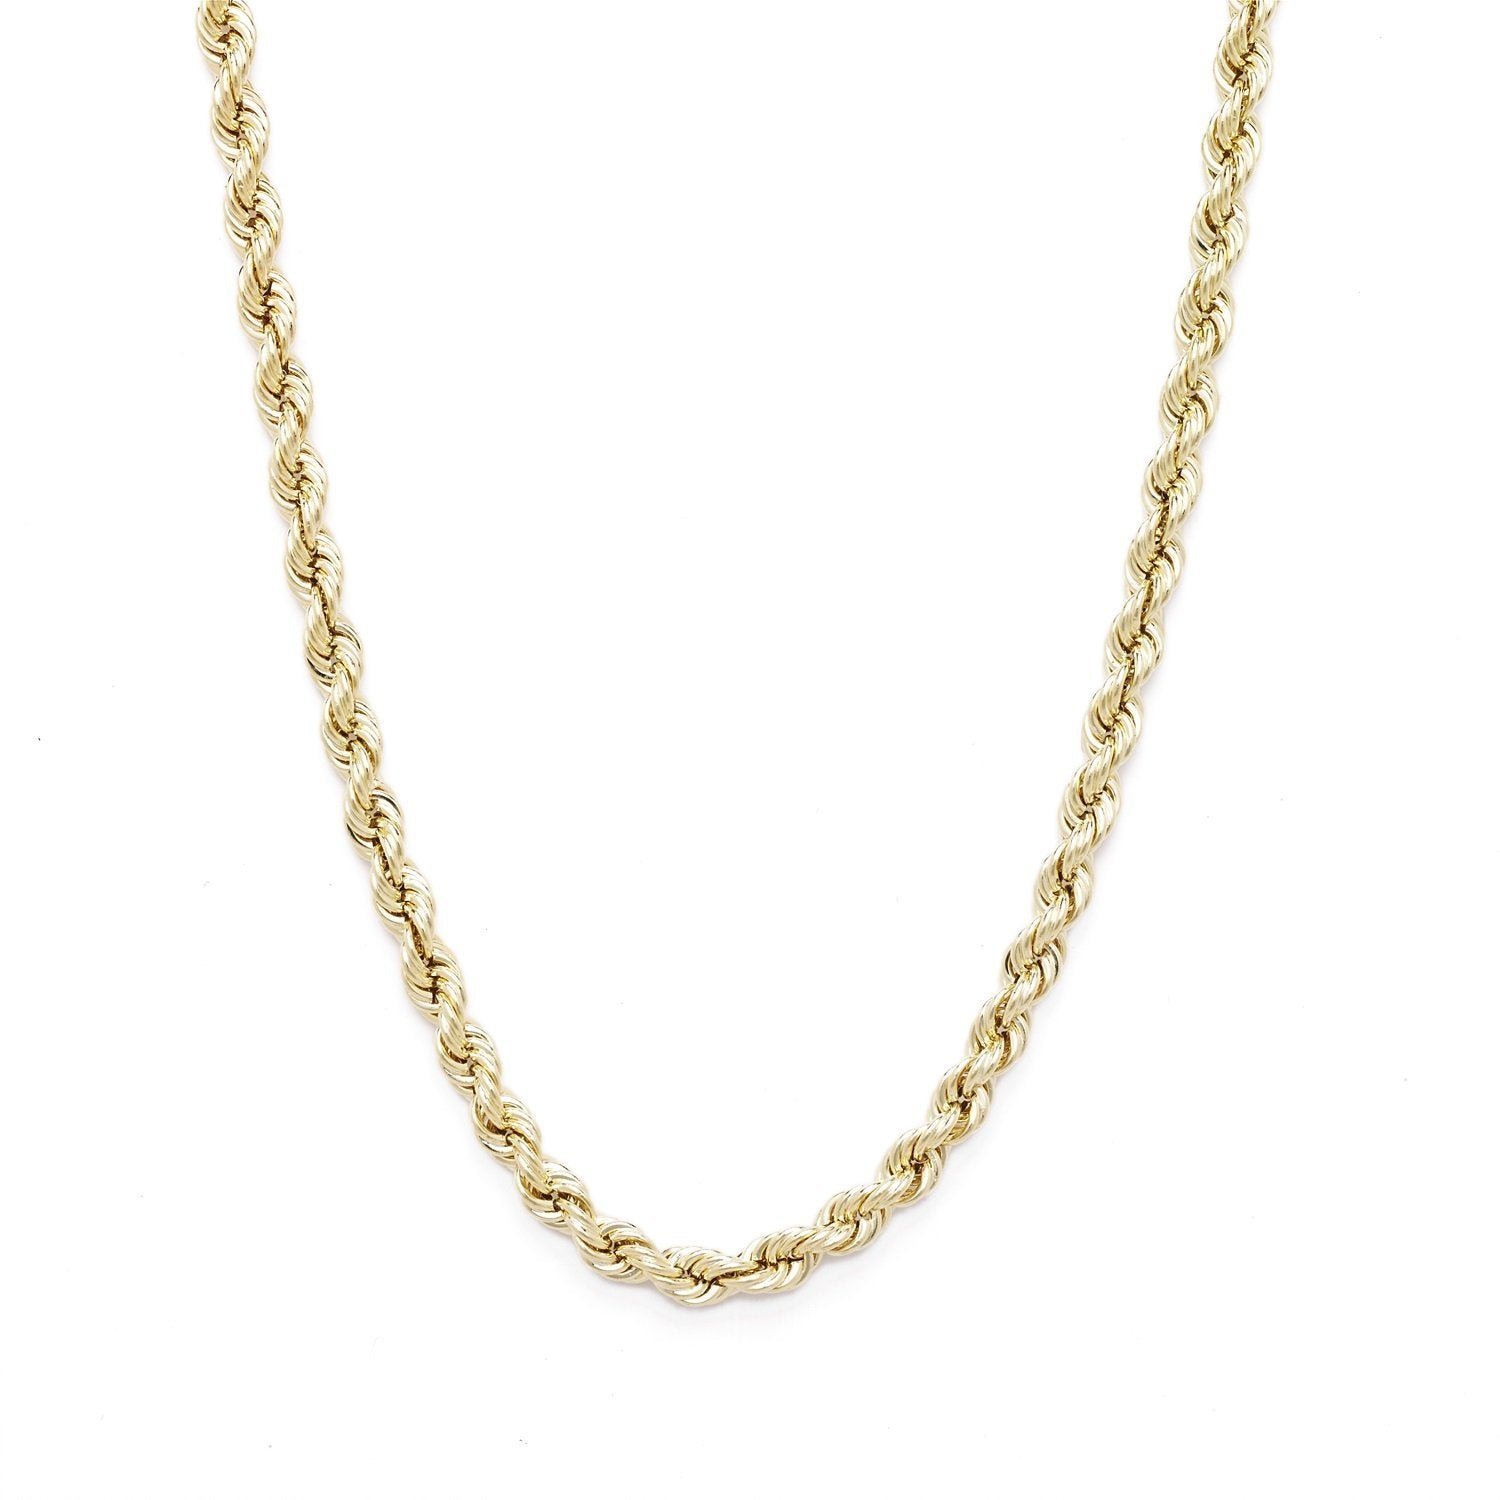 10k Yellow Gold Hollow Rope Chain Necklace with Lobster Claw Clasp, 5mm